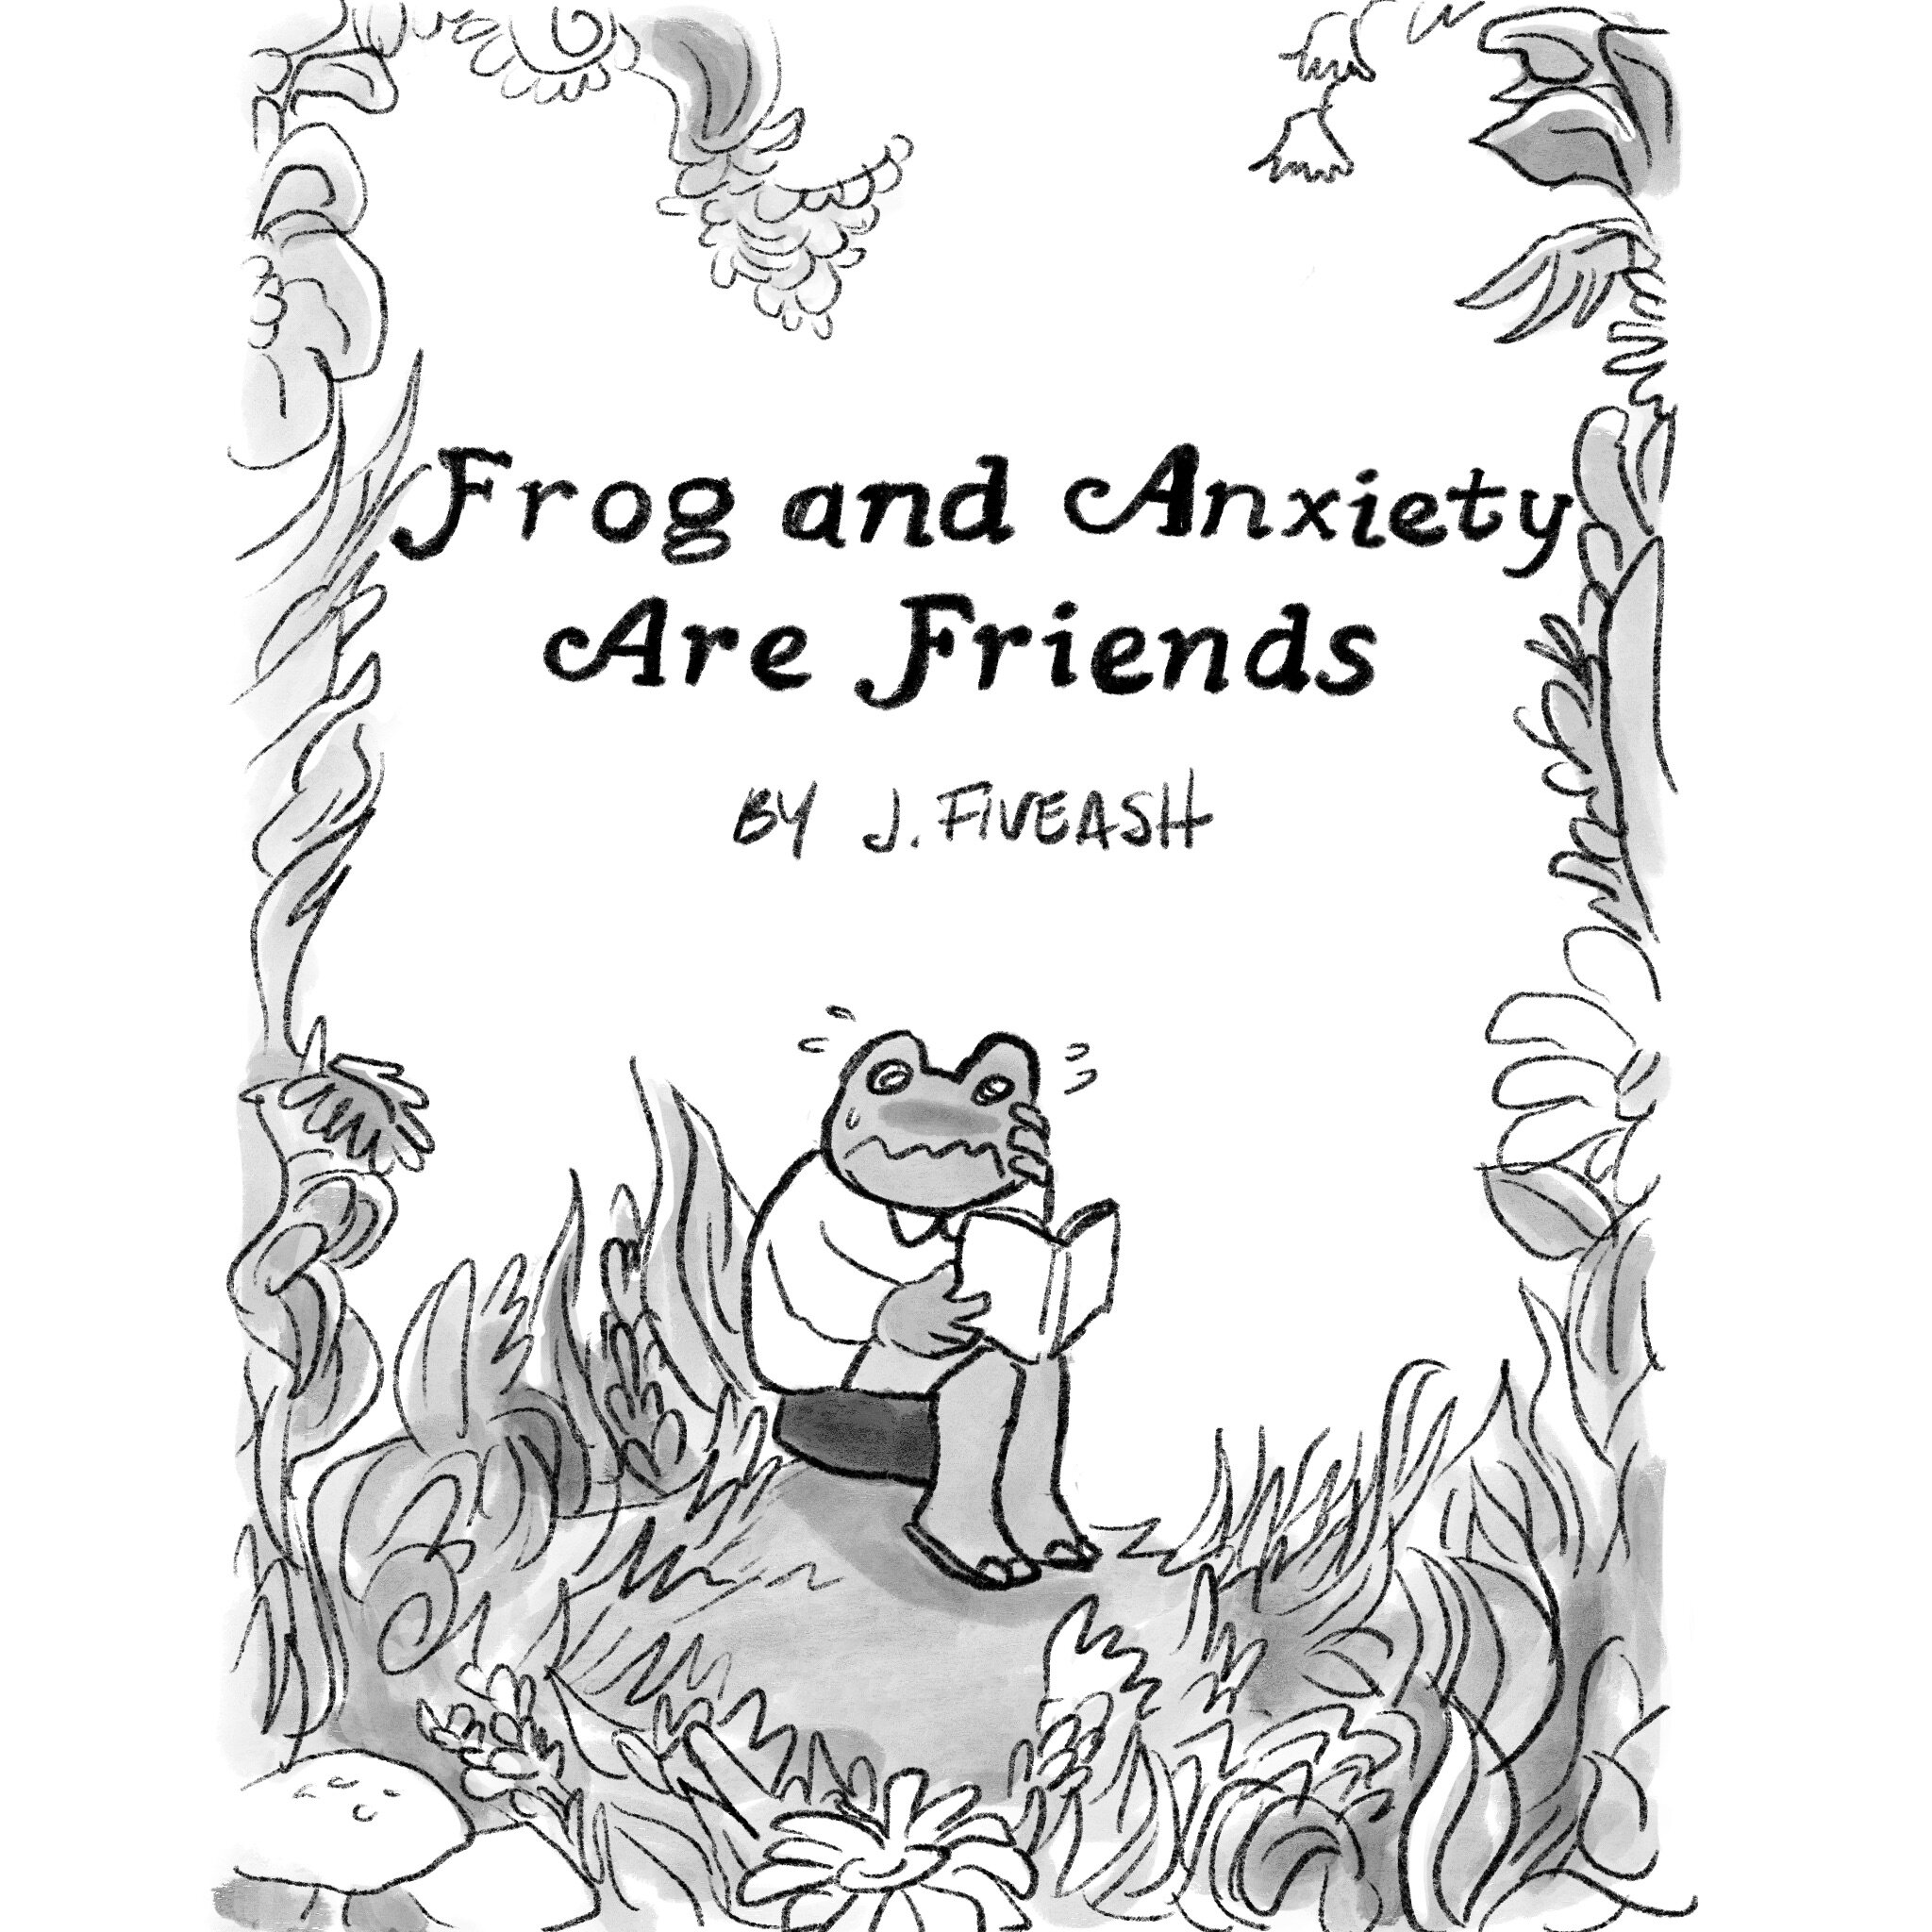 Frog and Anxiety Are Friends by Julie Fiveash